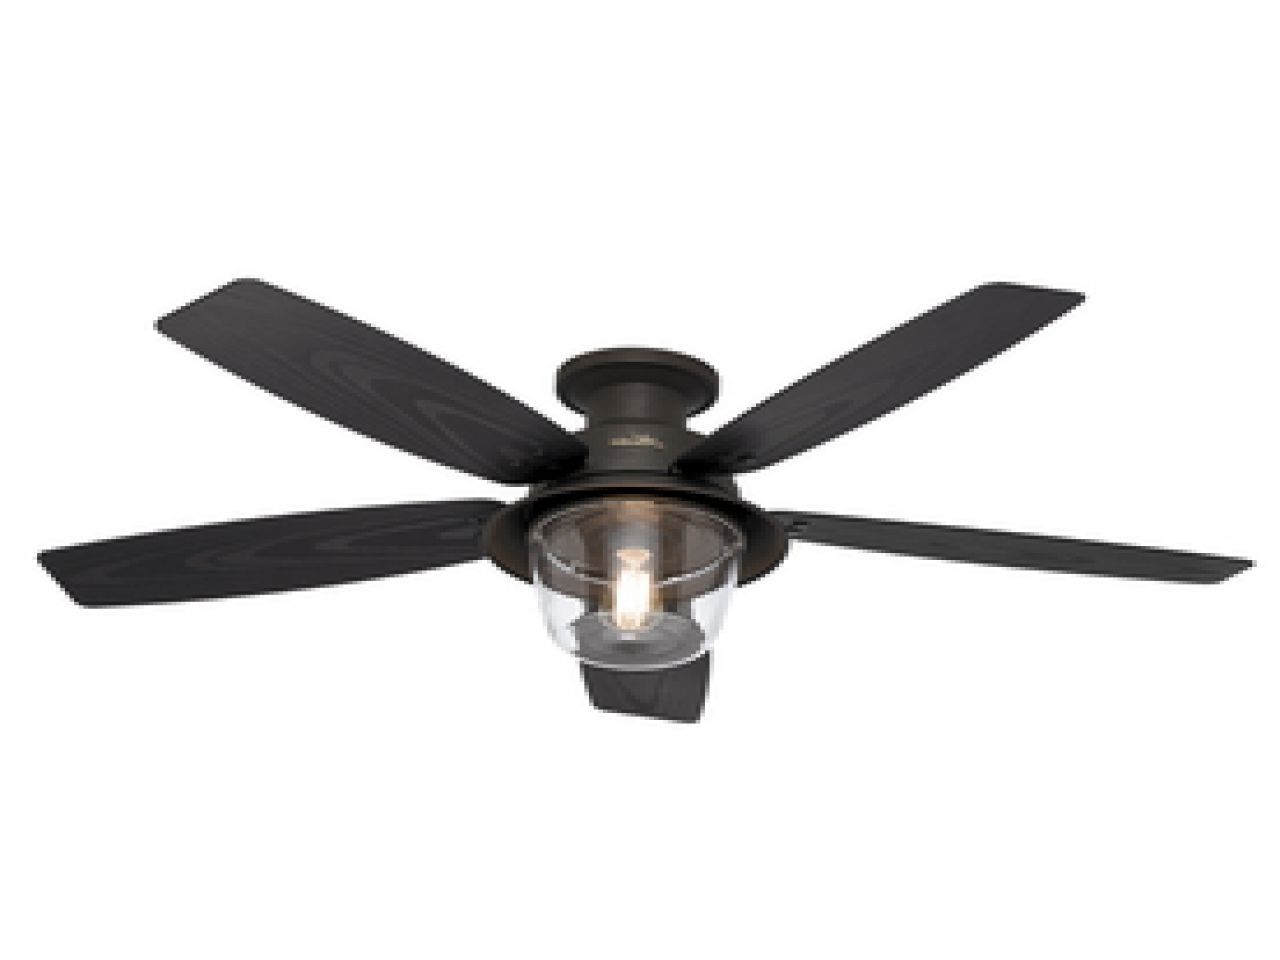 Small Outdoor Ceiling Lights Regarding 2019 Small Outdoor Ceiling Fan With Light (View 16 of 20)